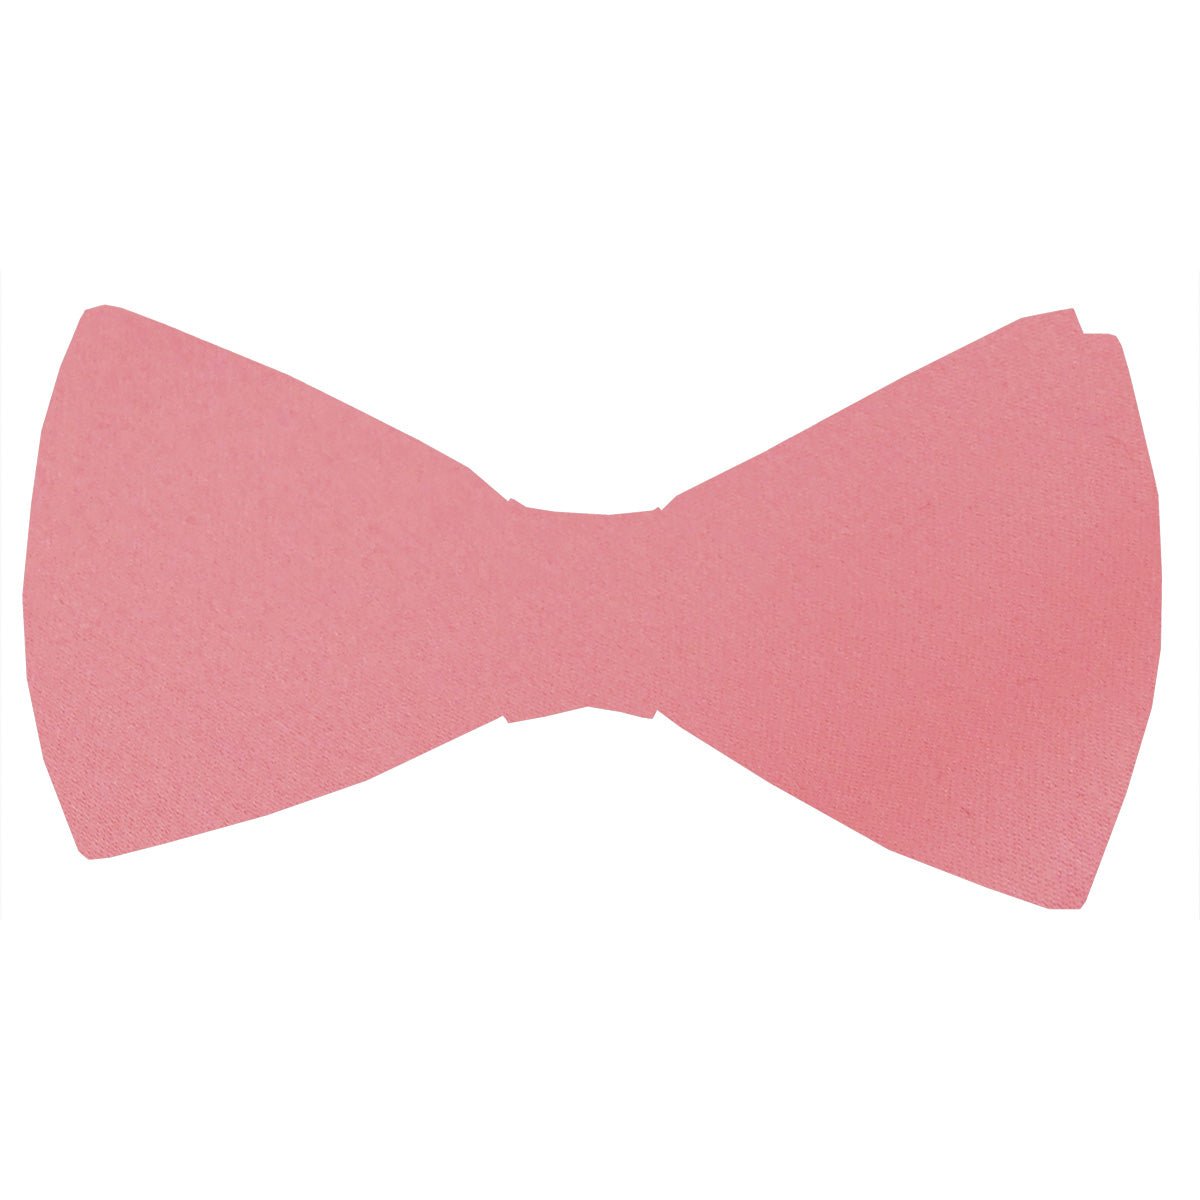 Antique Rose Bow Ties